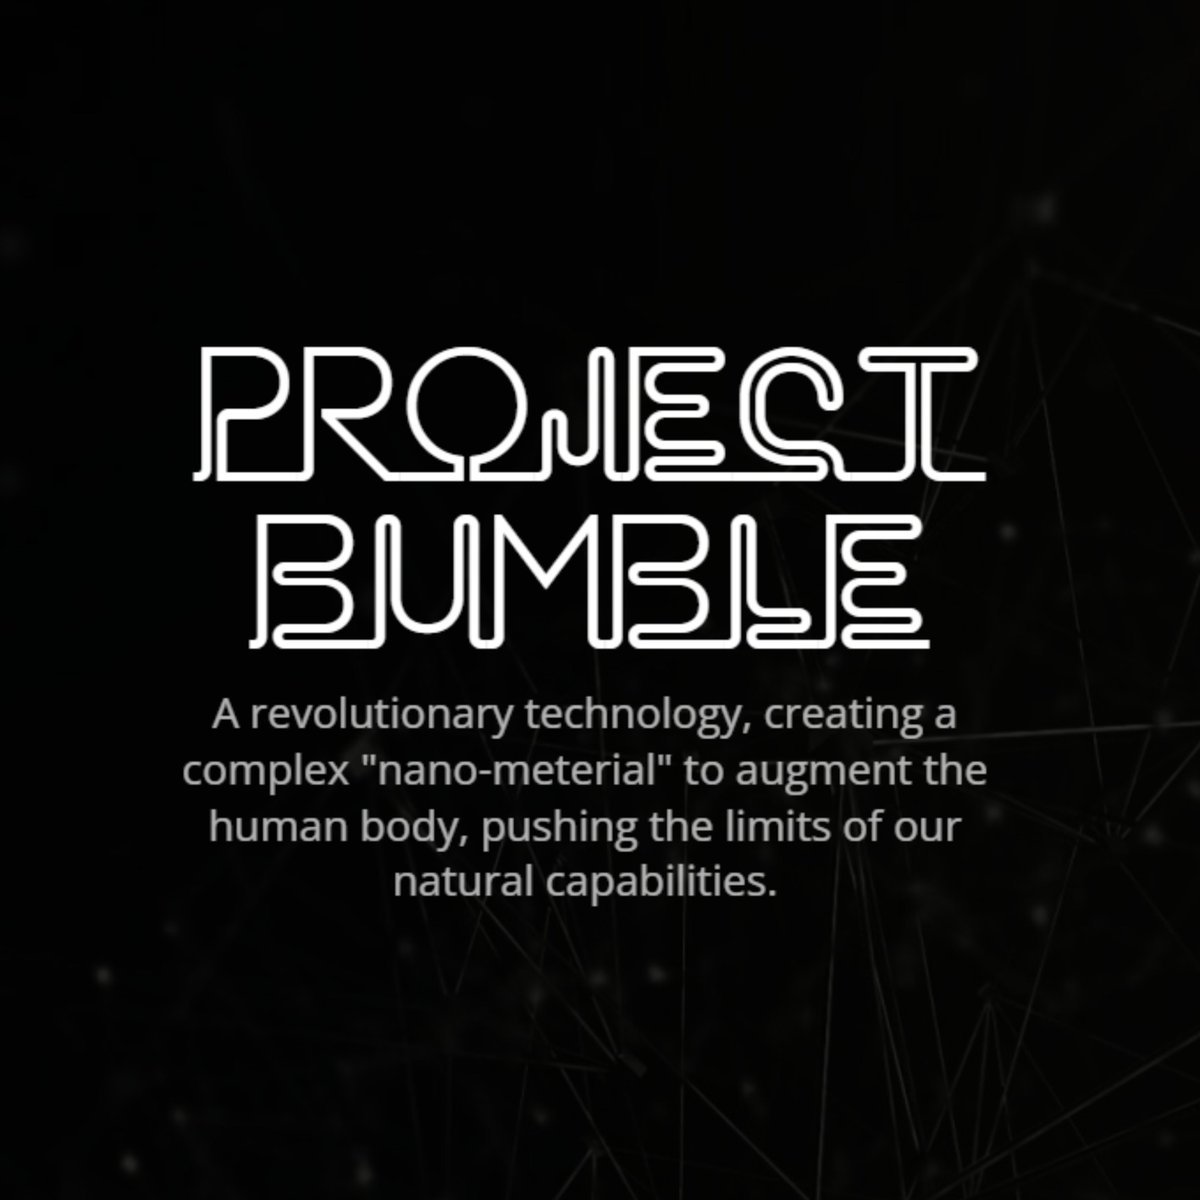 Project Bumble - mimic & augment A revolutionary technology, creating a complex 'nano-meterial' to augment the human body, pushing the limits of our natural capabilities. projectbumble.com #projectbumble #mimic #augment